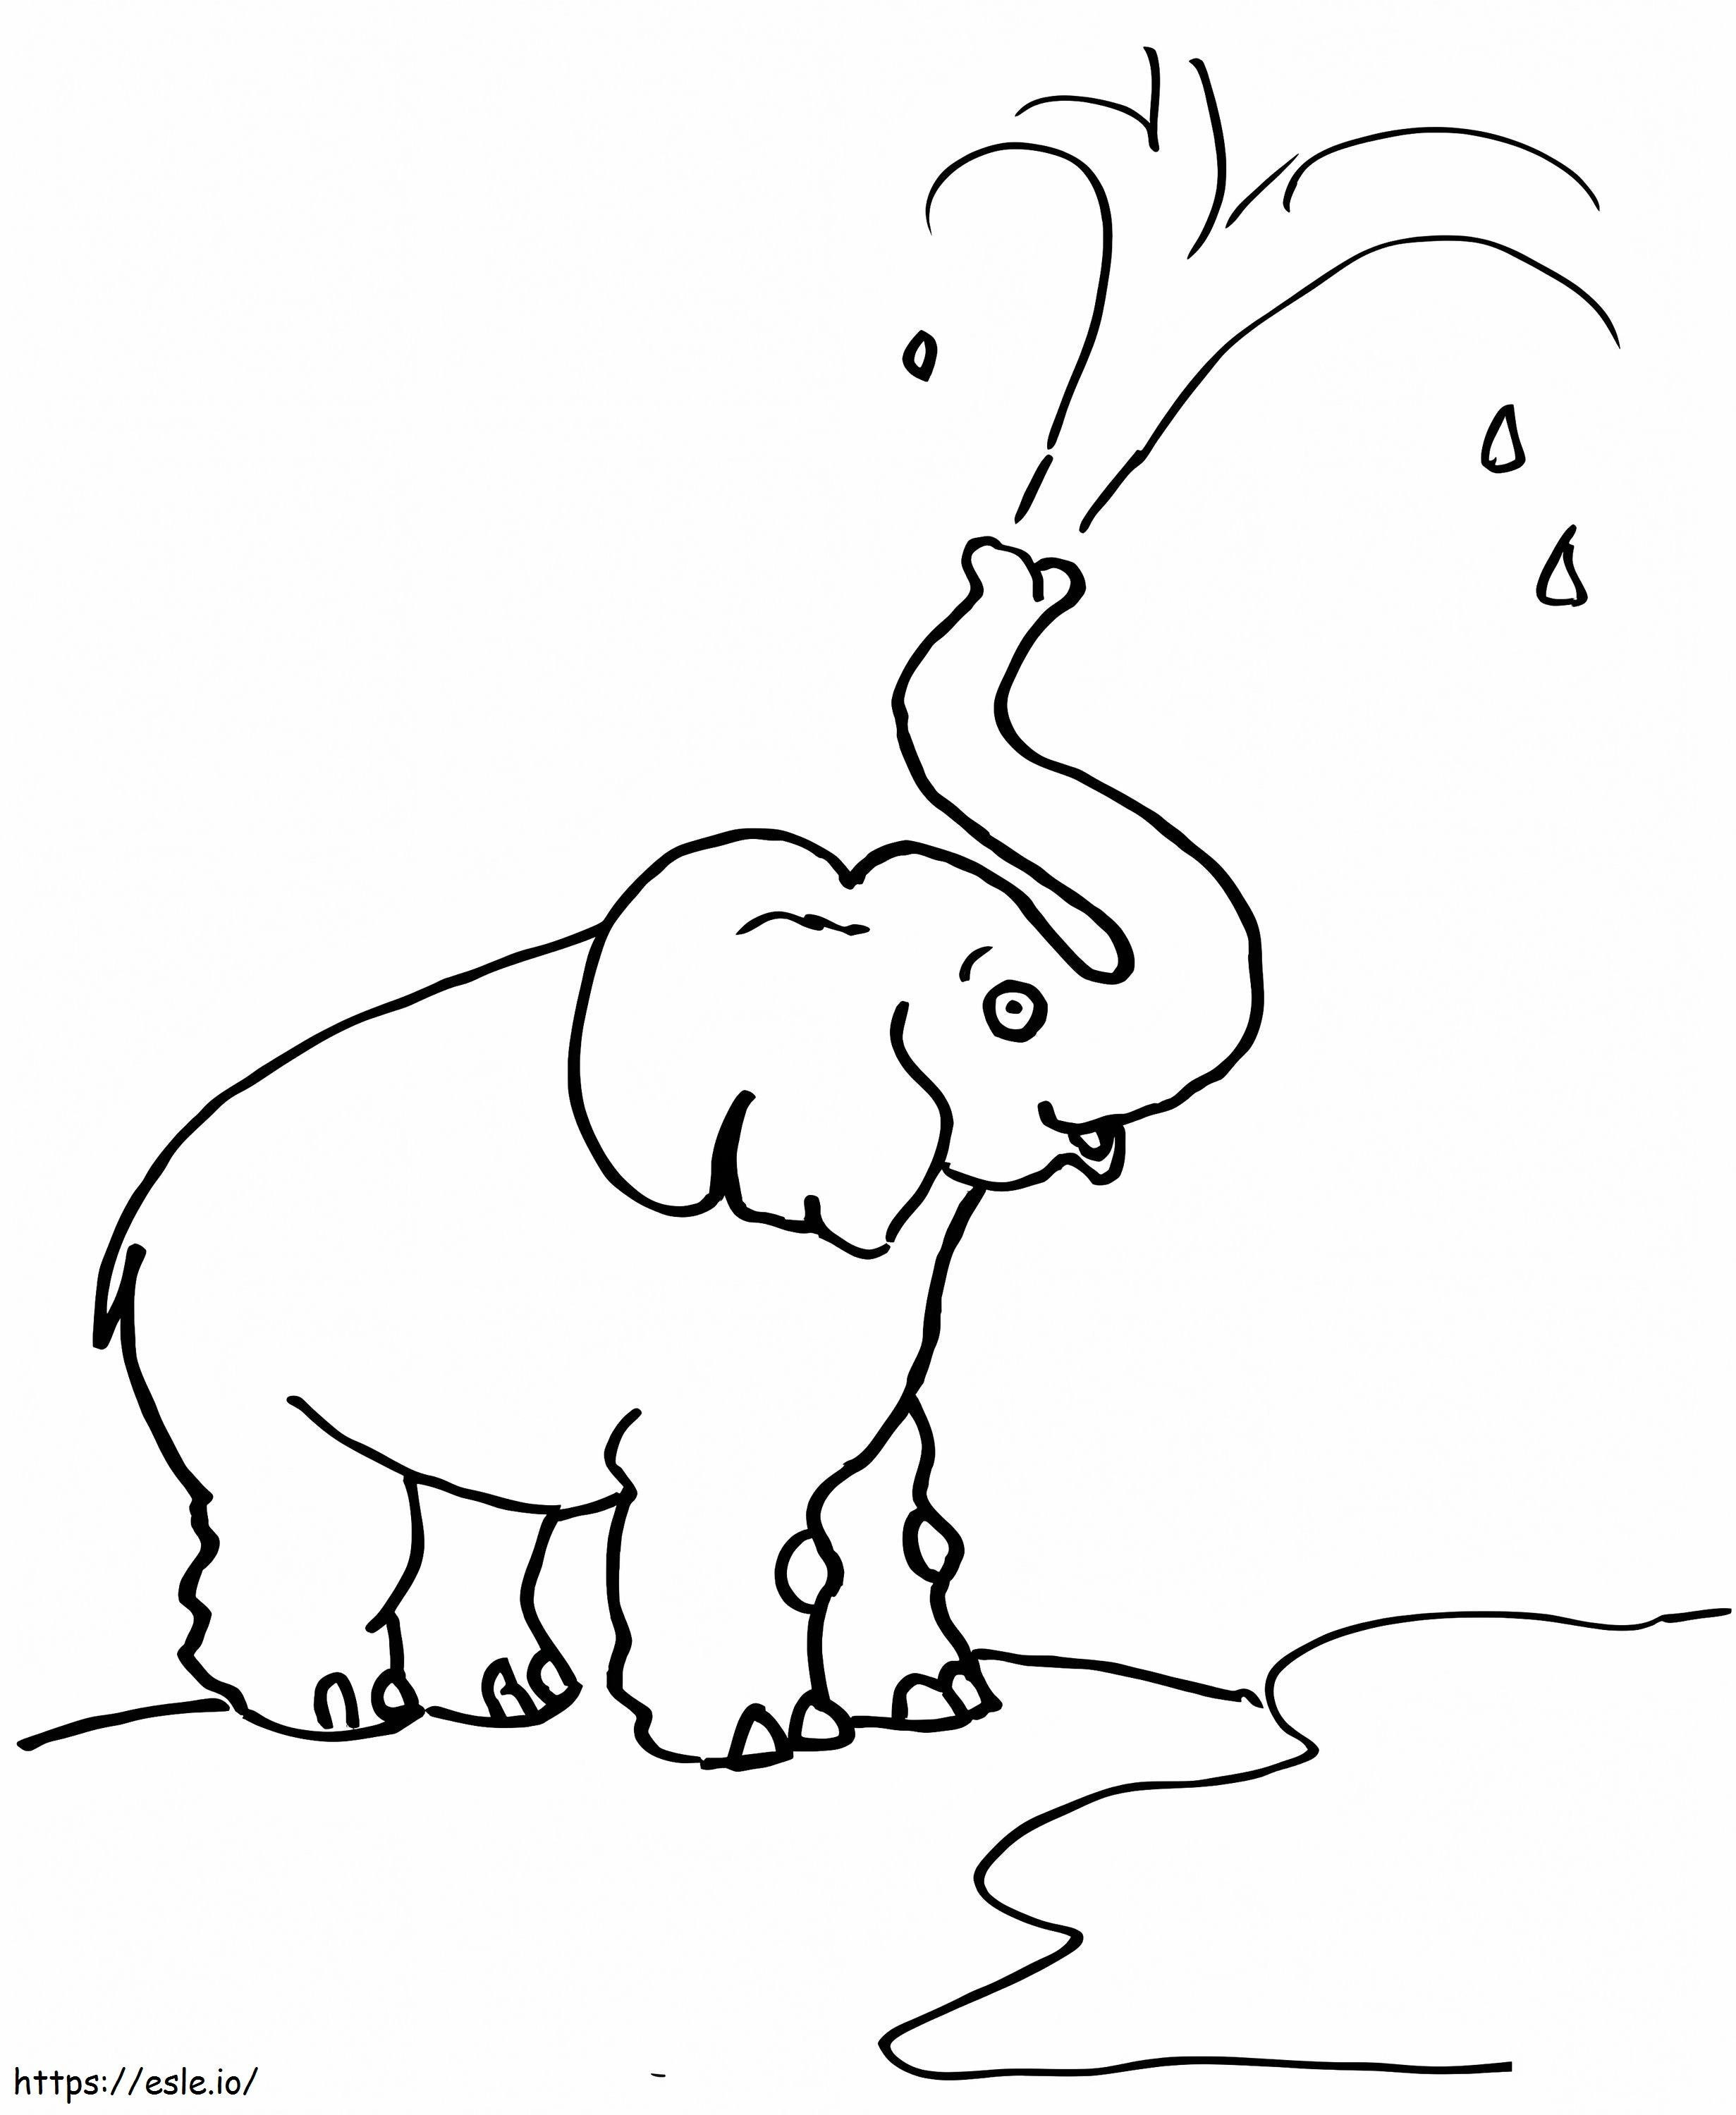 Elephant Blows Water coloring page